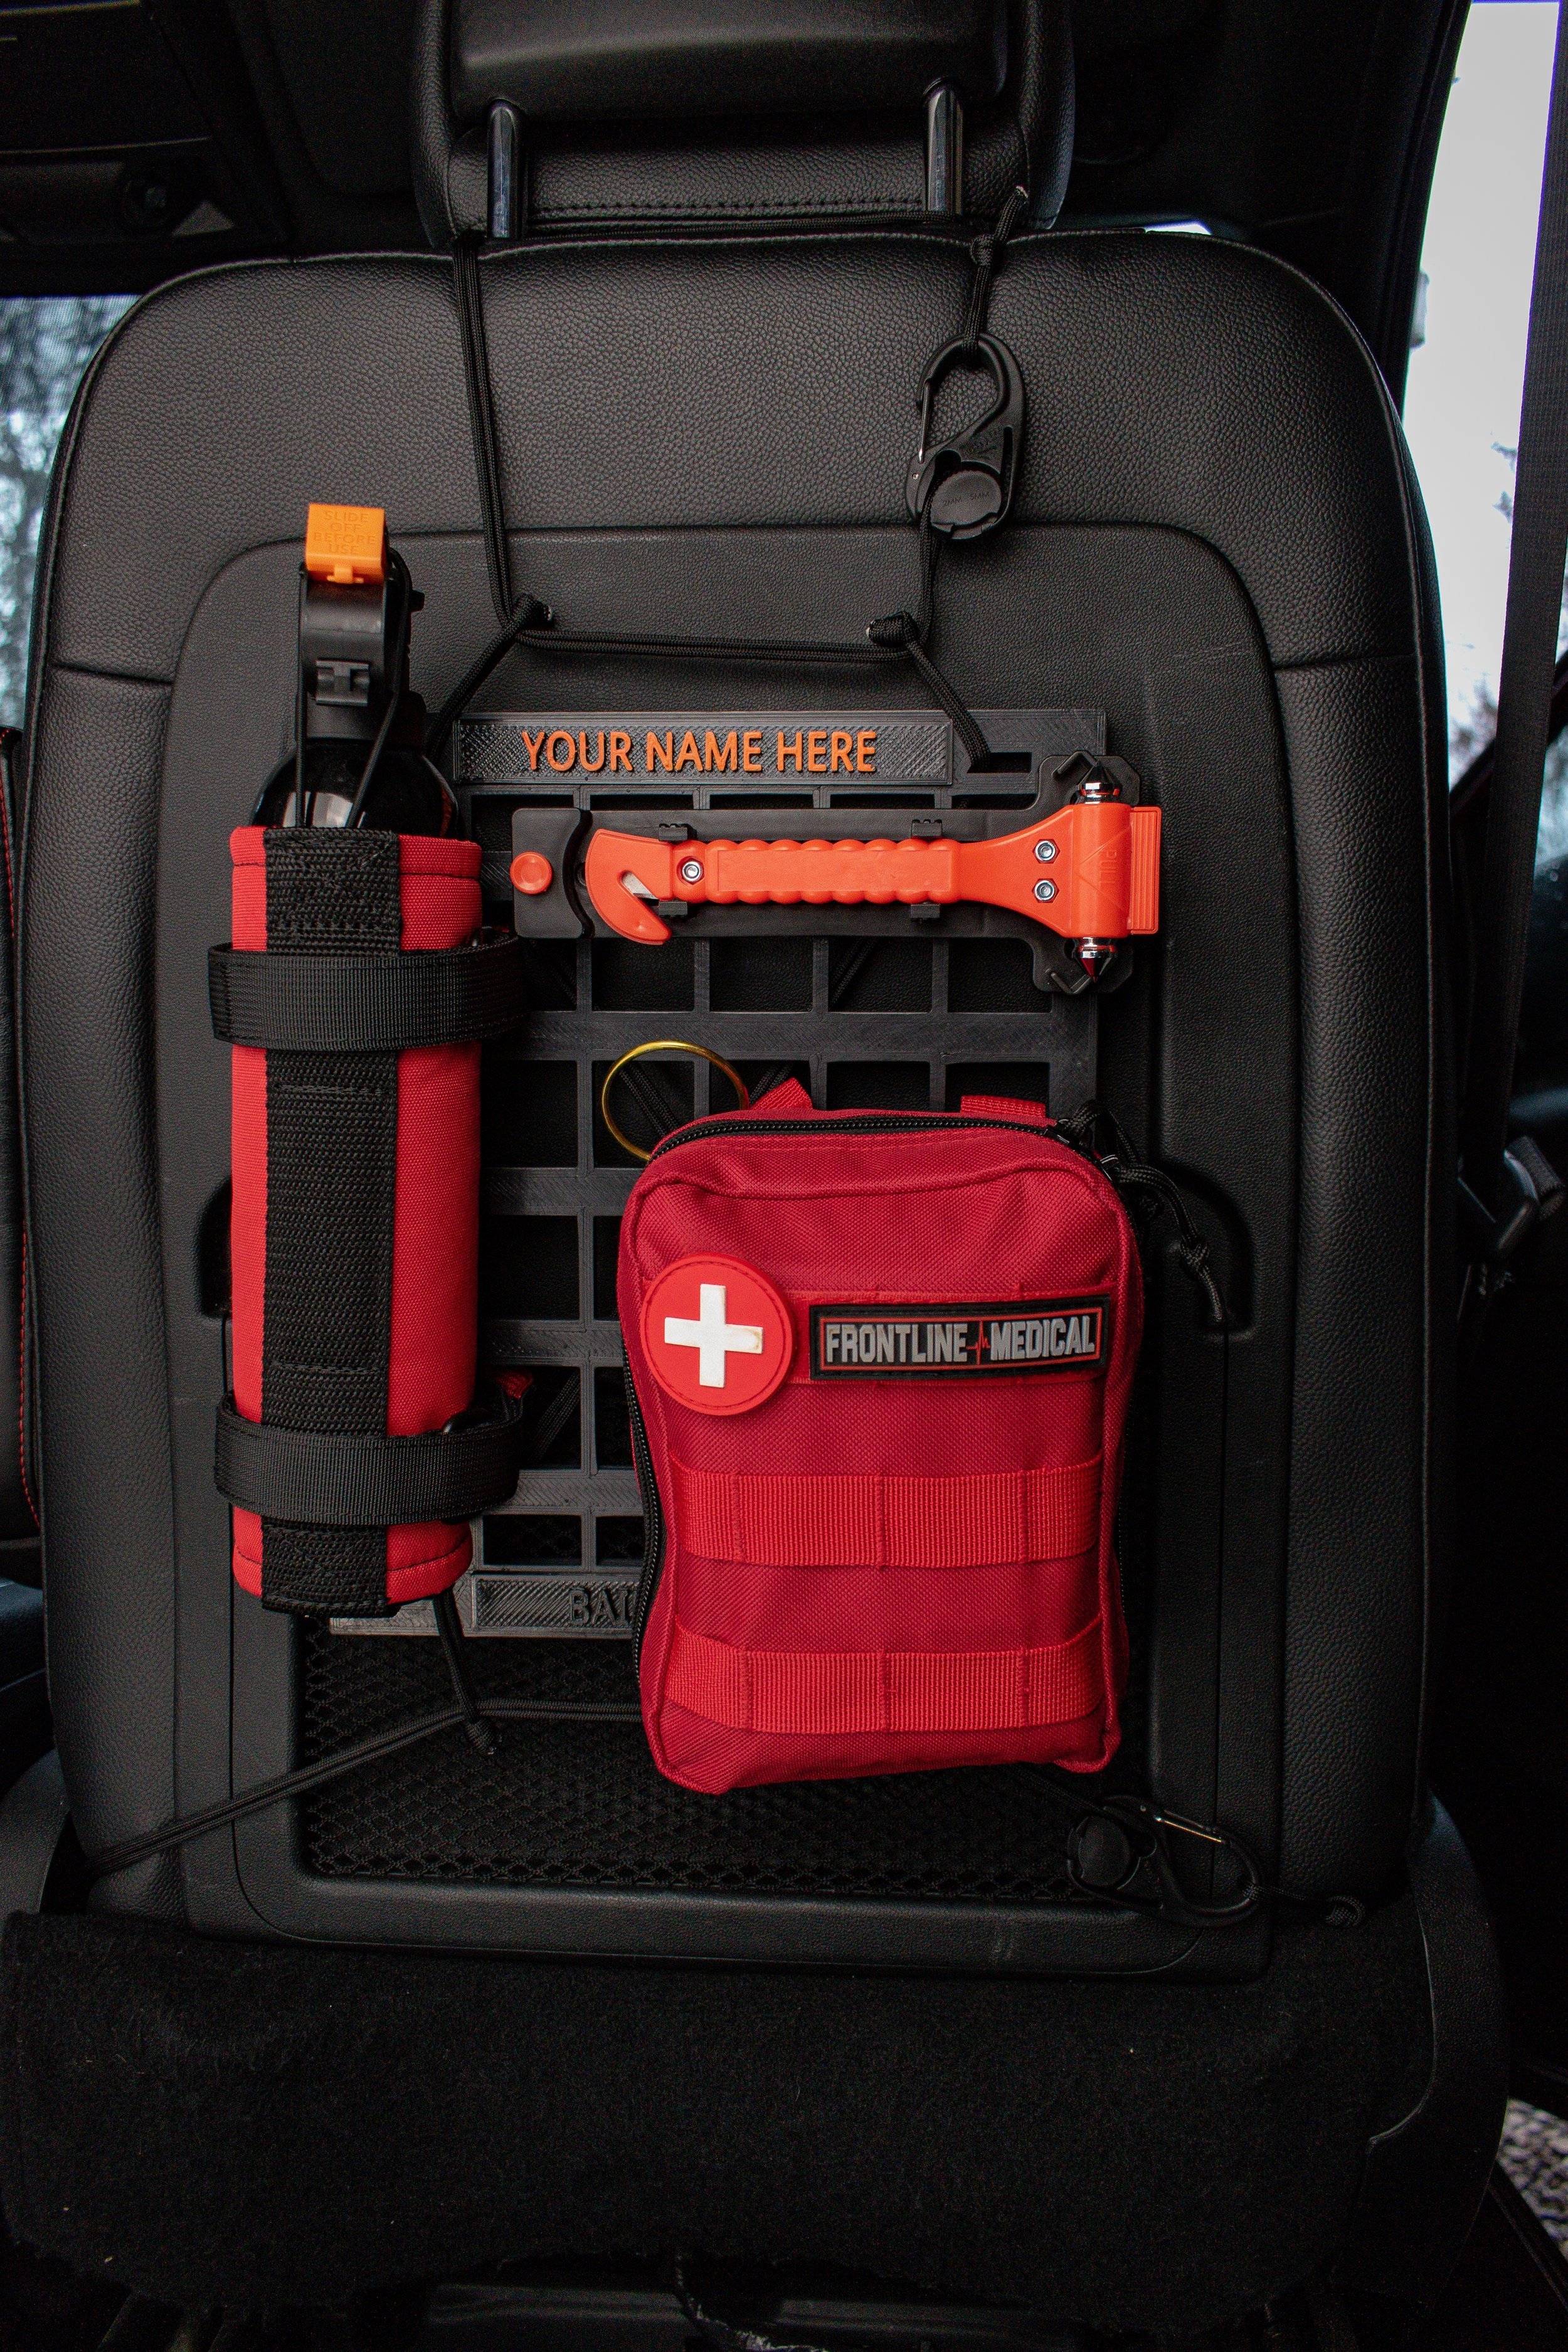 Vehicle/Truck First Aid Kit